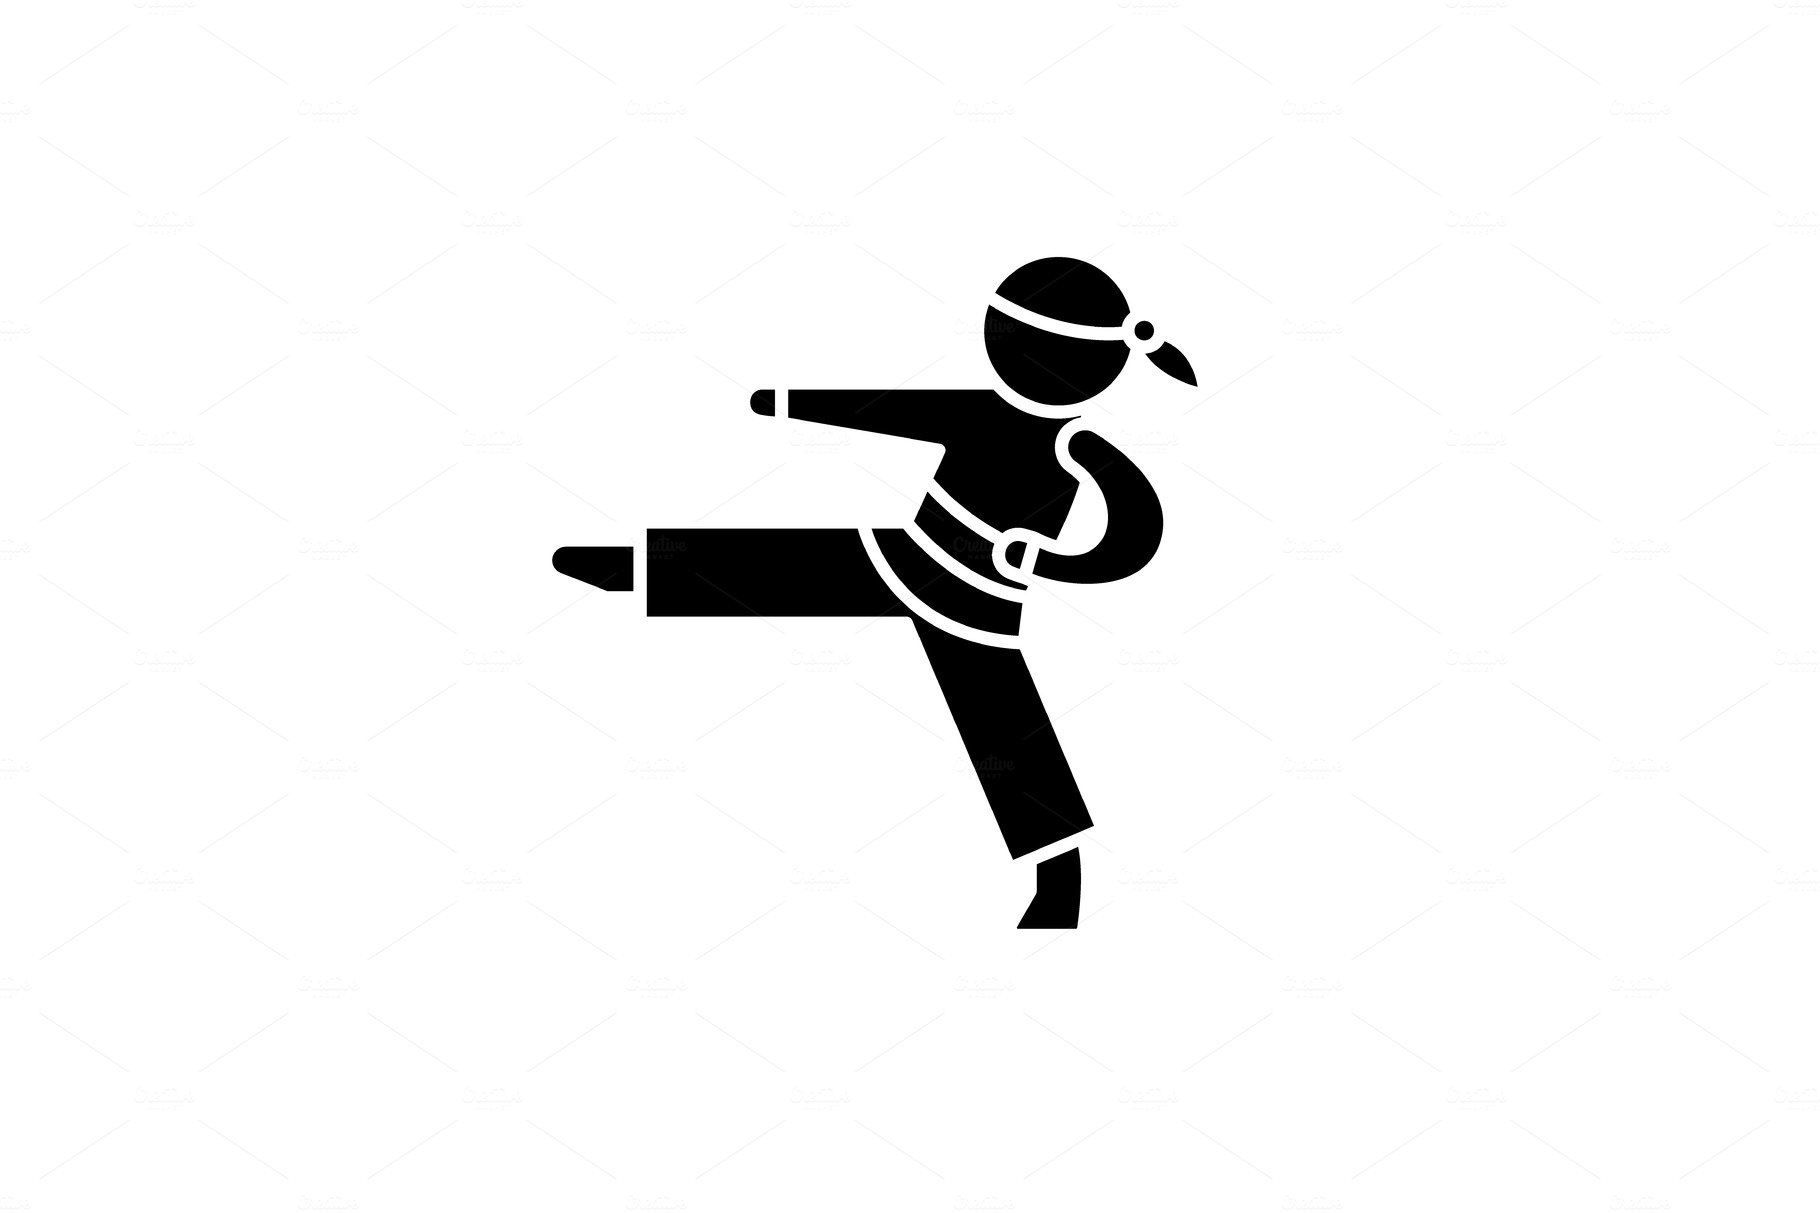 Karate black icon, vector sign on cover image.